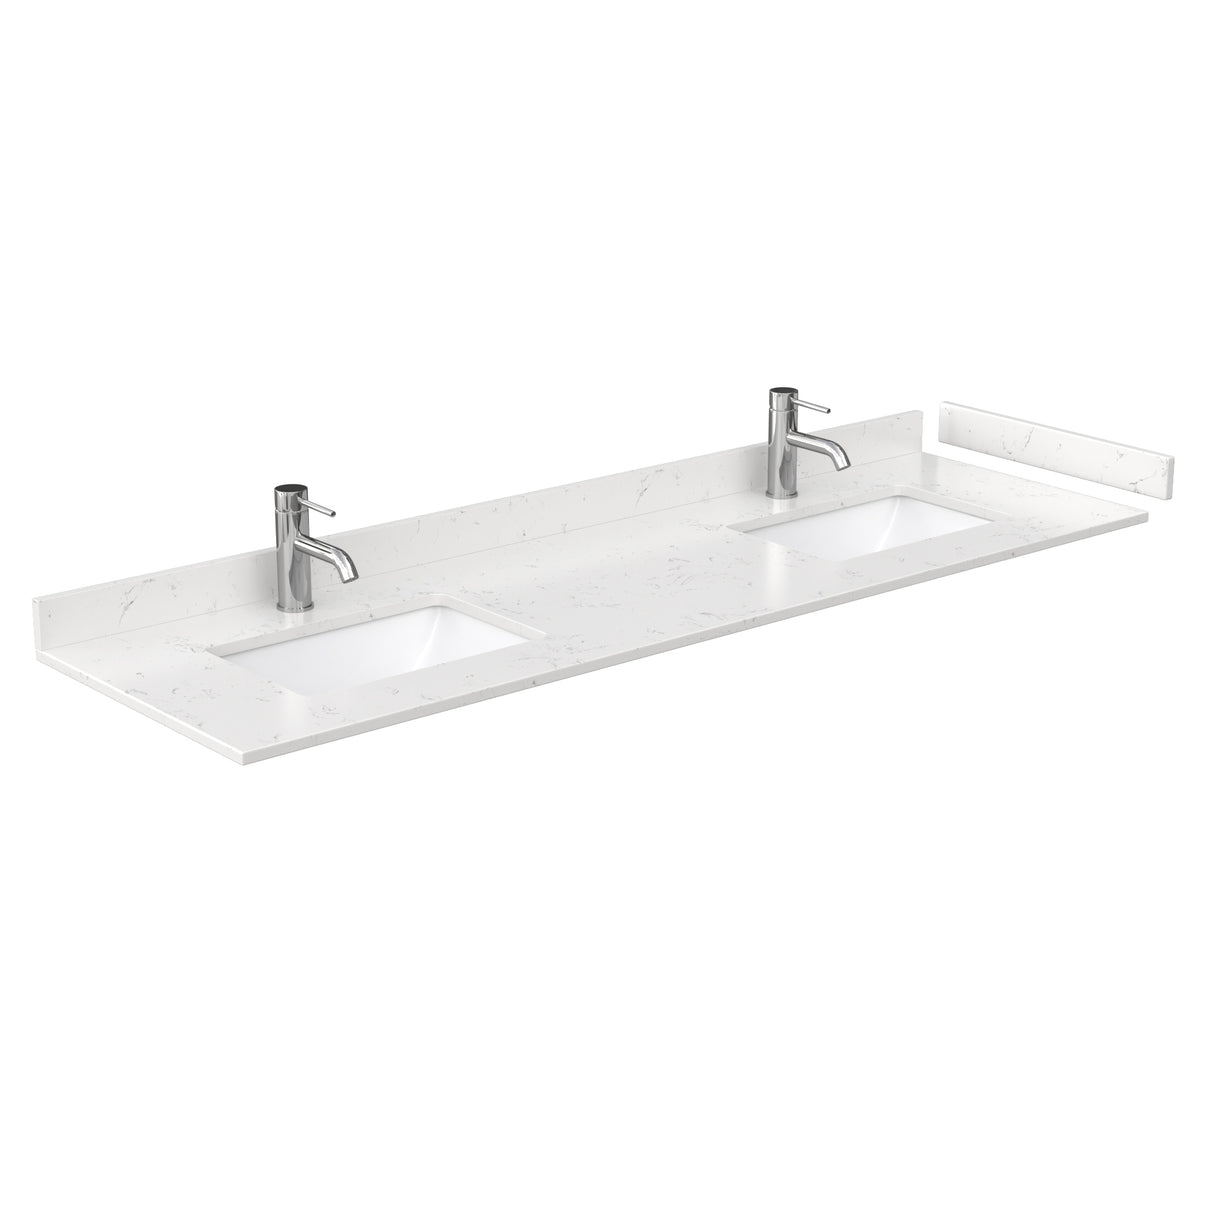 Sheffield 72 Inch Double Bathroom Vanity in White Carrara Cultured Marble Countertop Undermount Square Sinks 24 Inch Mirrors